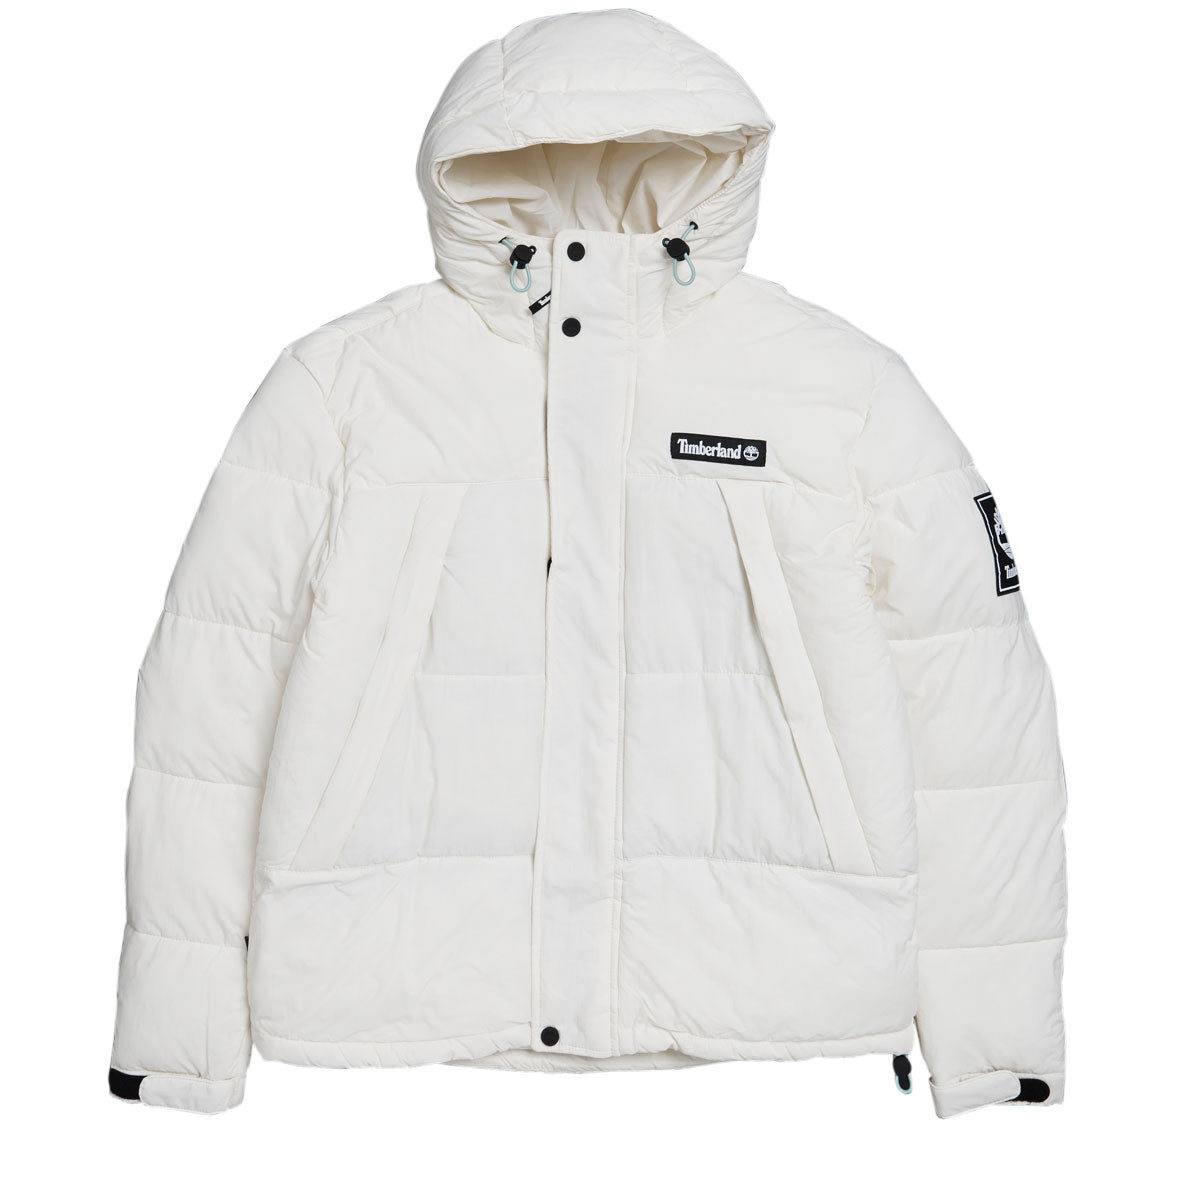 Timberland DWR Outdoor Archive Puffer Jacket - Solitary Star image 1